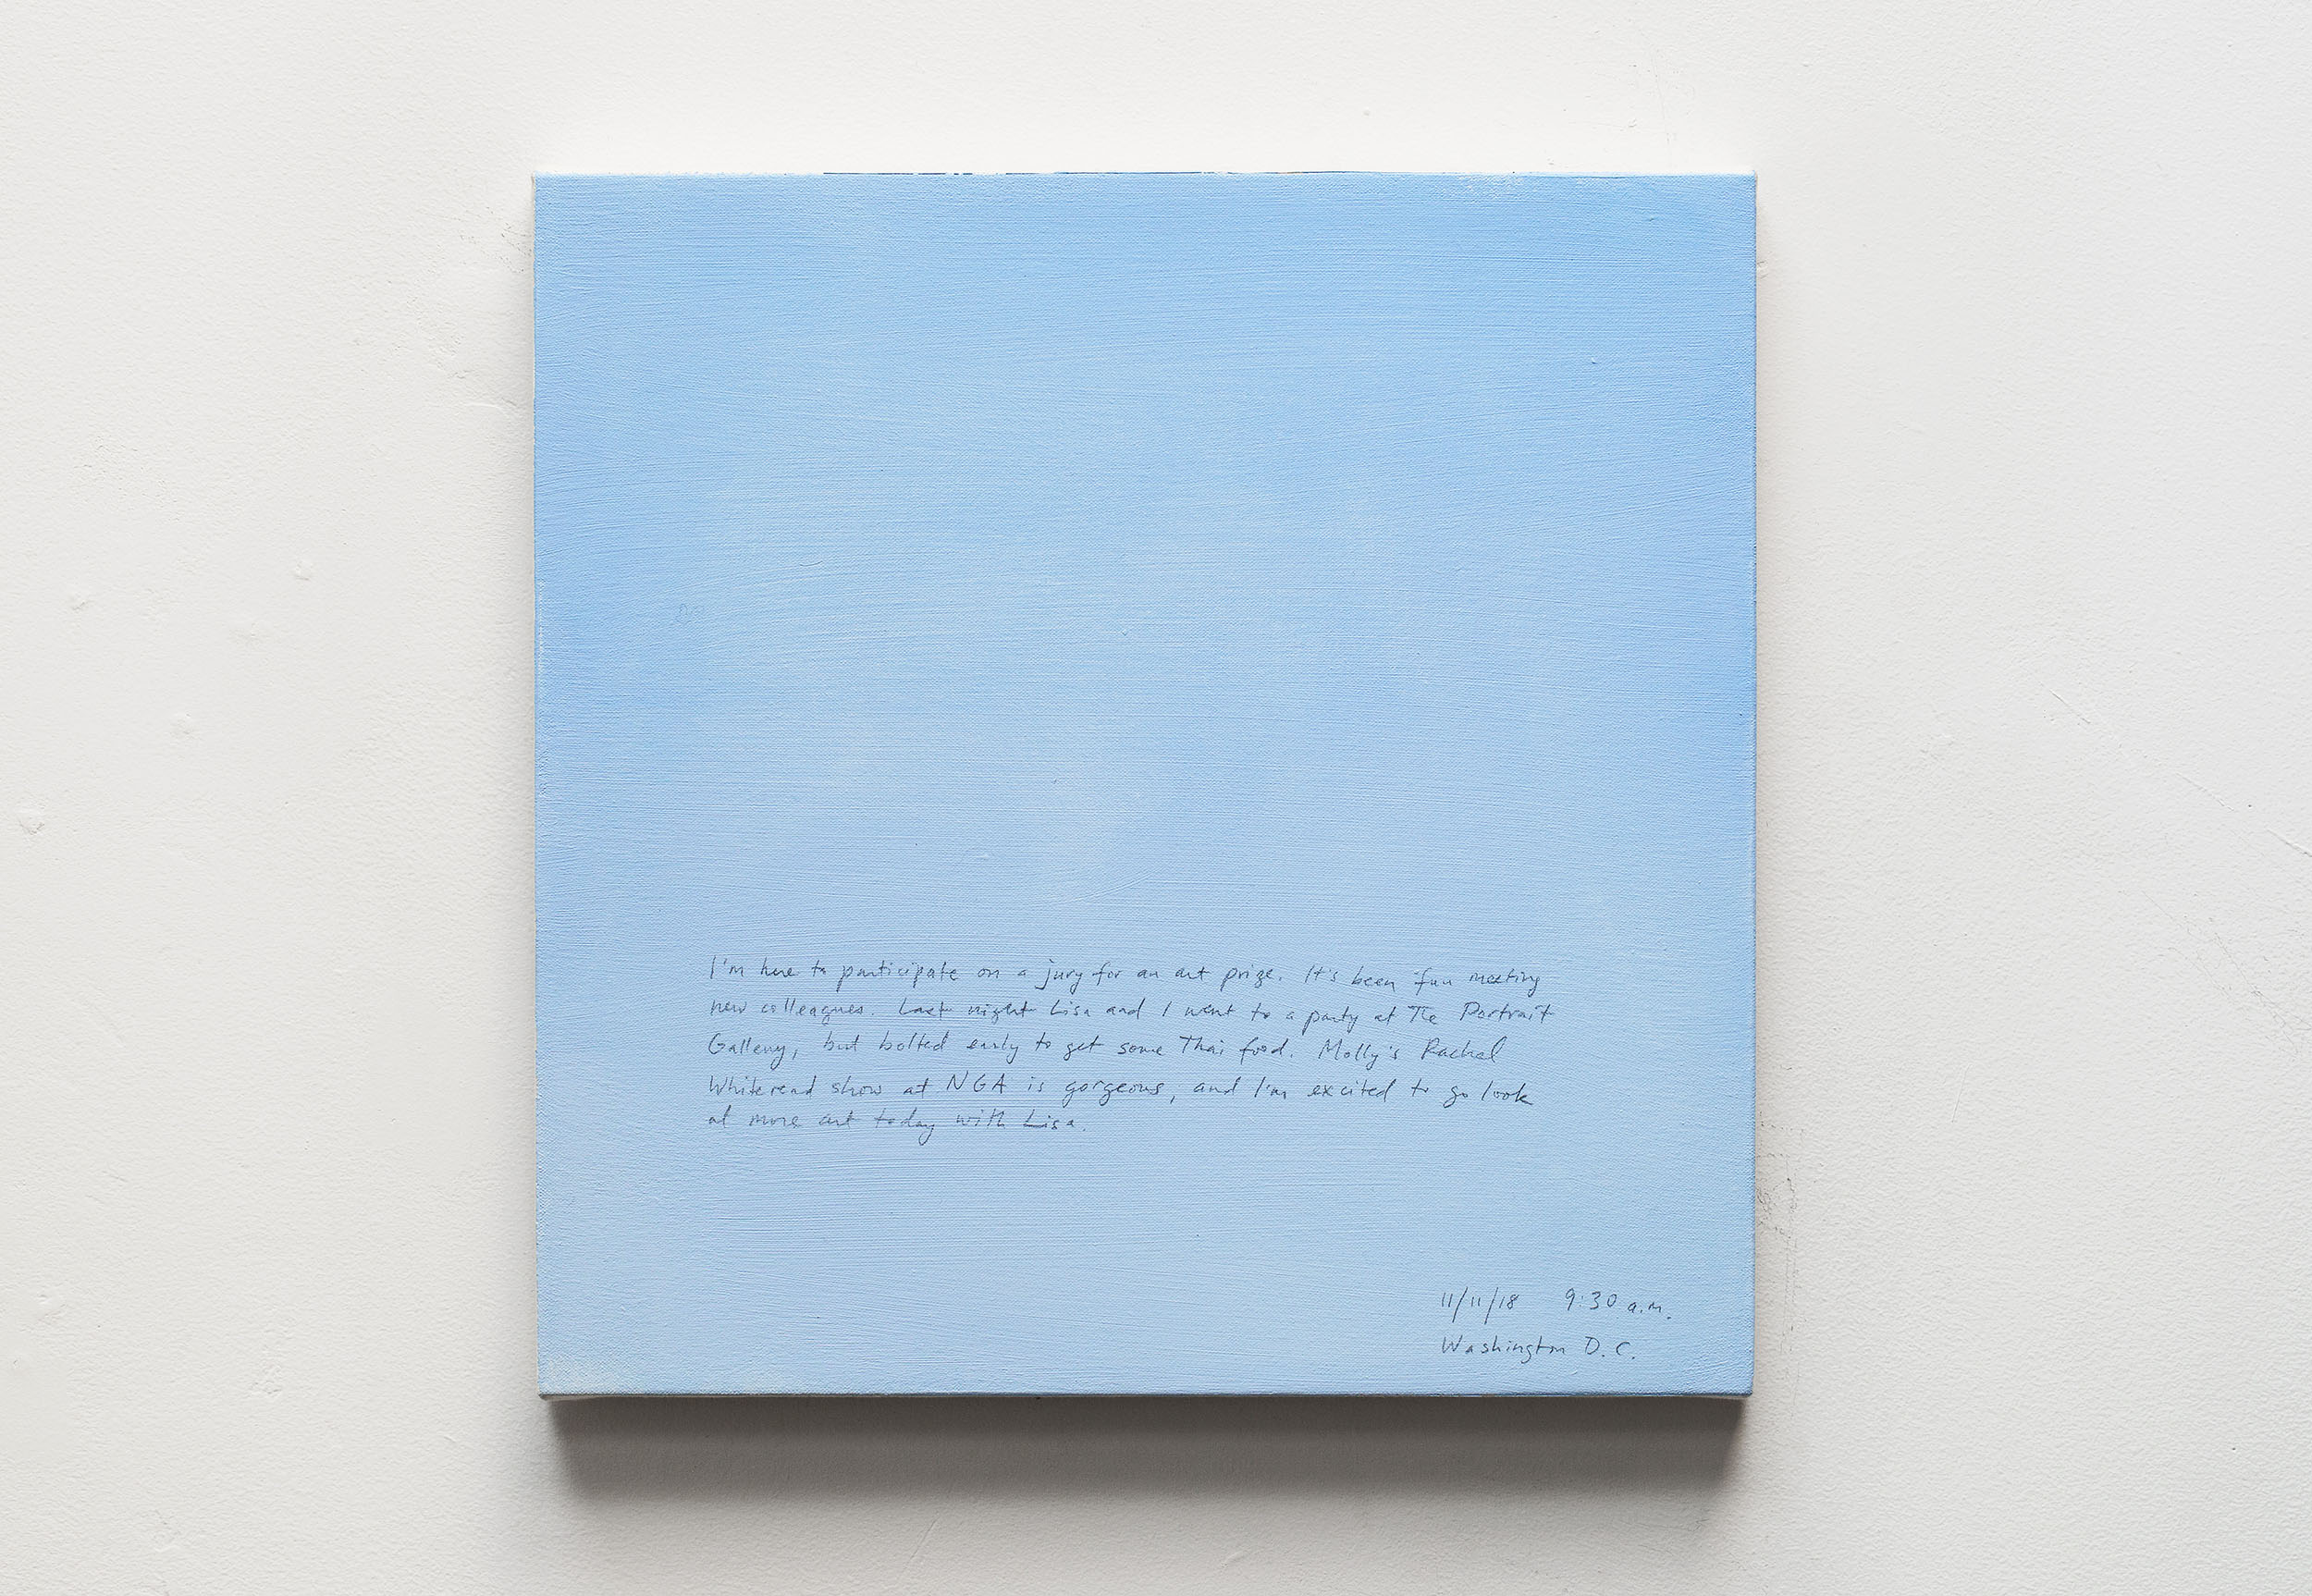 A 14 × 14 inch, acrylic painting of the sky. A journal entry is handwritten on the painting:

“I’m here to participate on a jury for an art prize. It’s been fun meeting new colleagues. Last night Lisa and I went to a party at the Portrait Gallery, but bolted early to get some Thai food. Molly’s Rachel Whiteread show at NGA is gorgeous, and I’m excited to go look at more art today with Lisa.

11/11/18 9:30 a.m.
Washington D.C.”